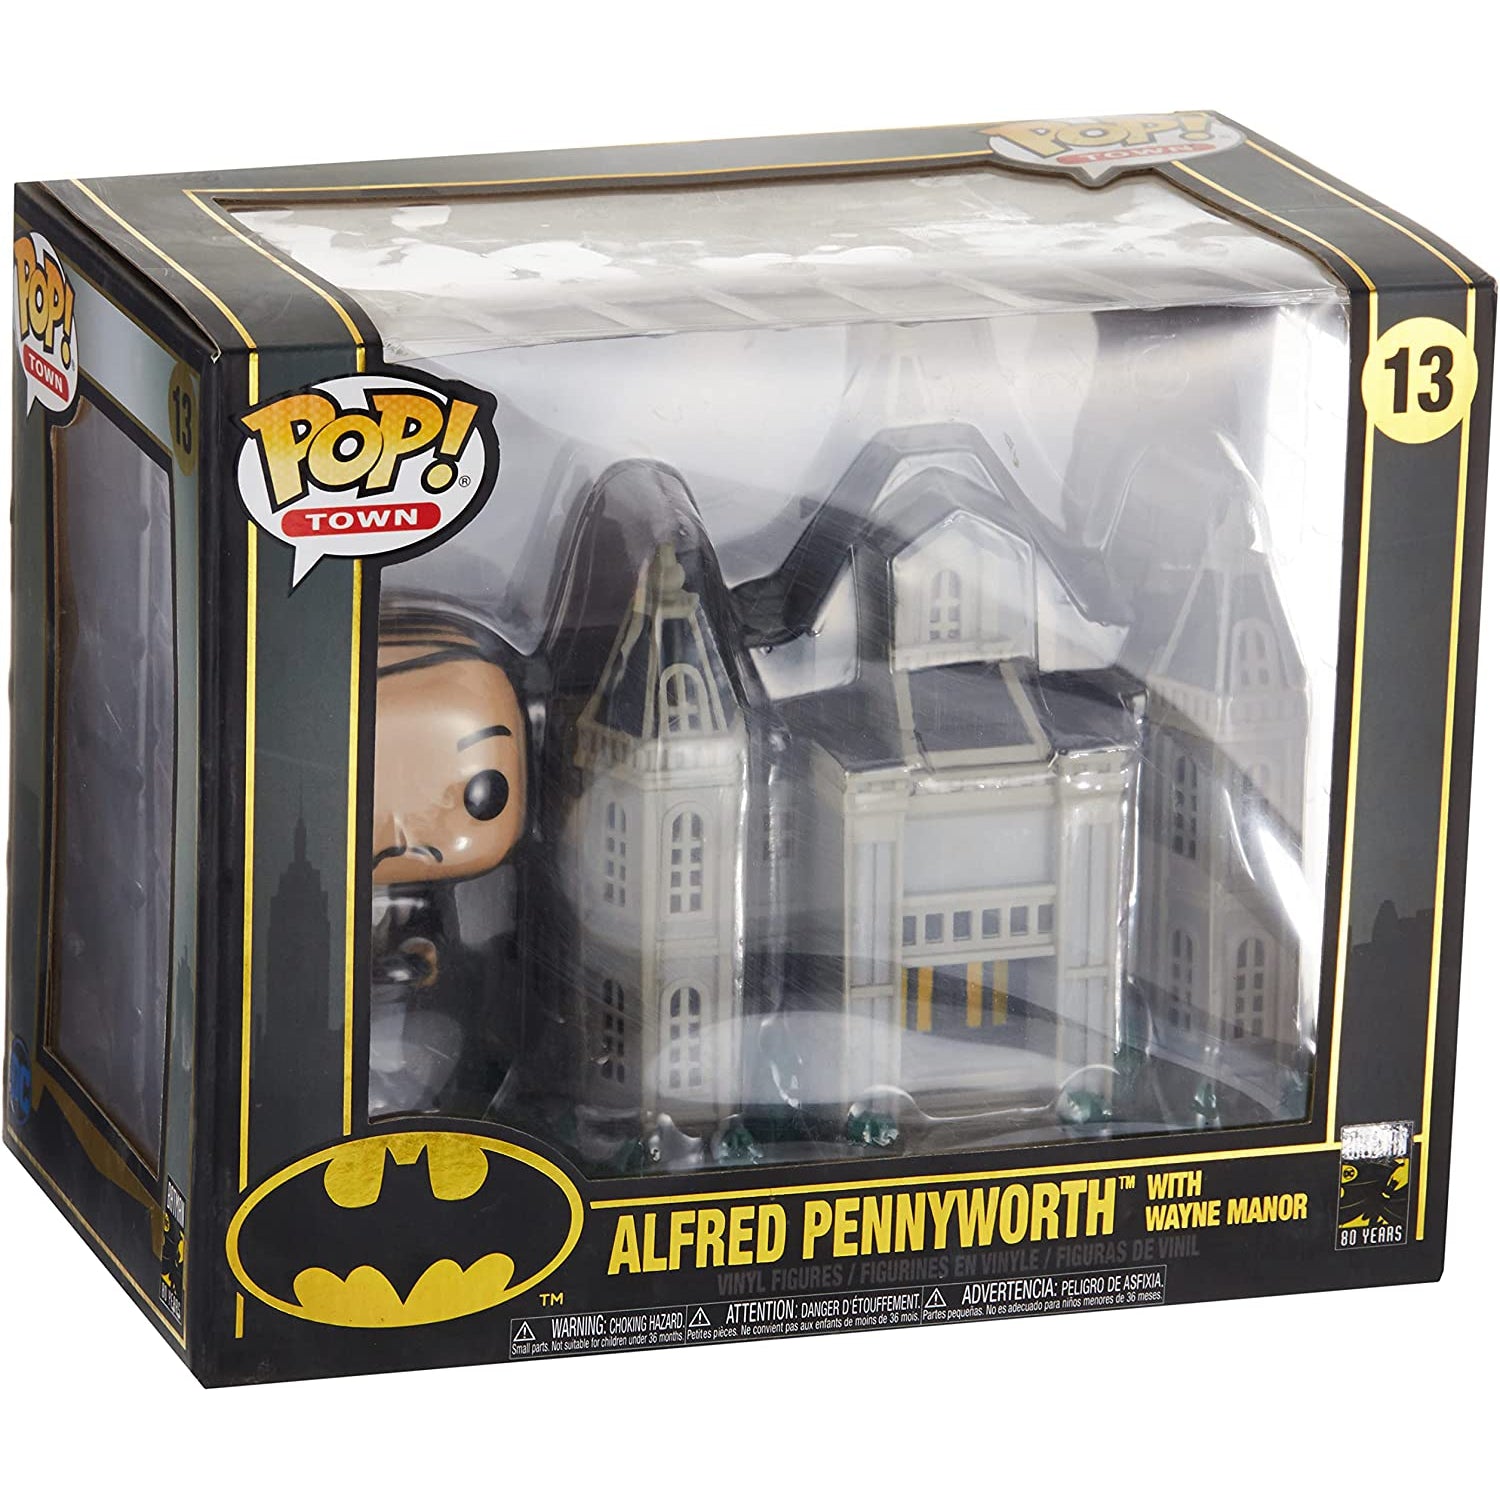 Funko Pop Town 13 - Alfred Pennyworth with Wayne Manor